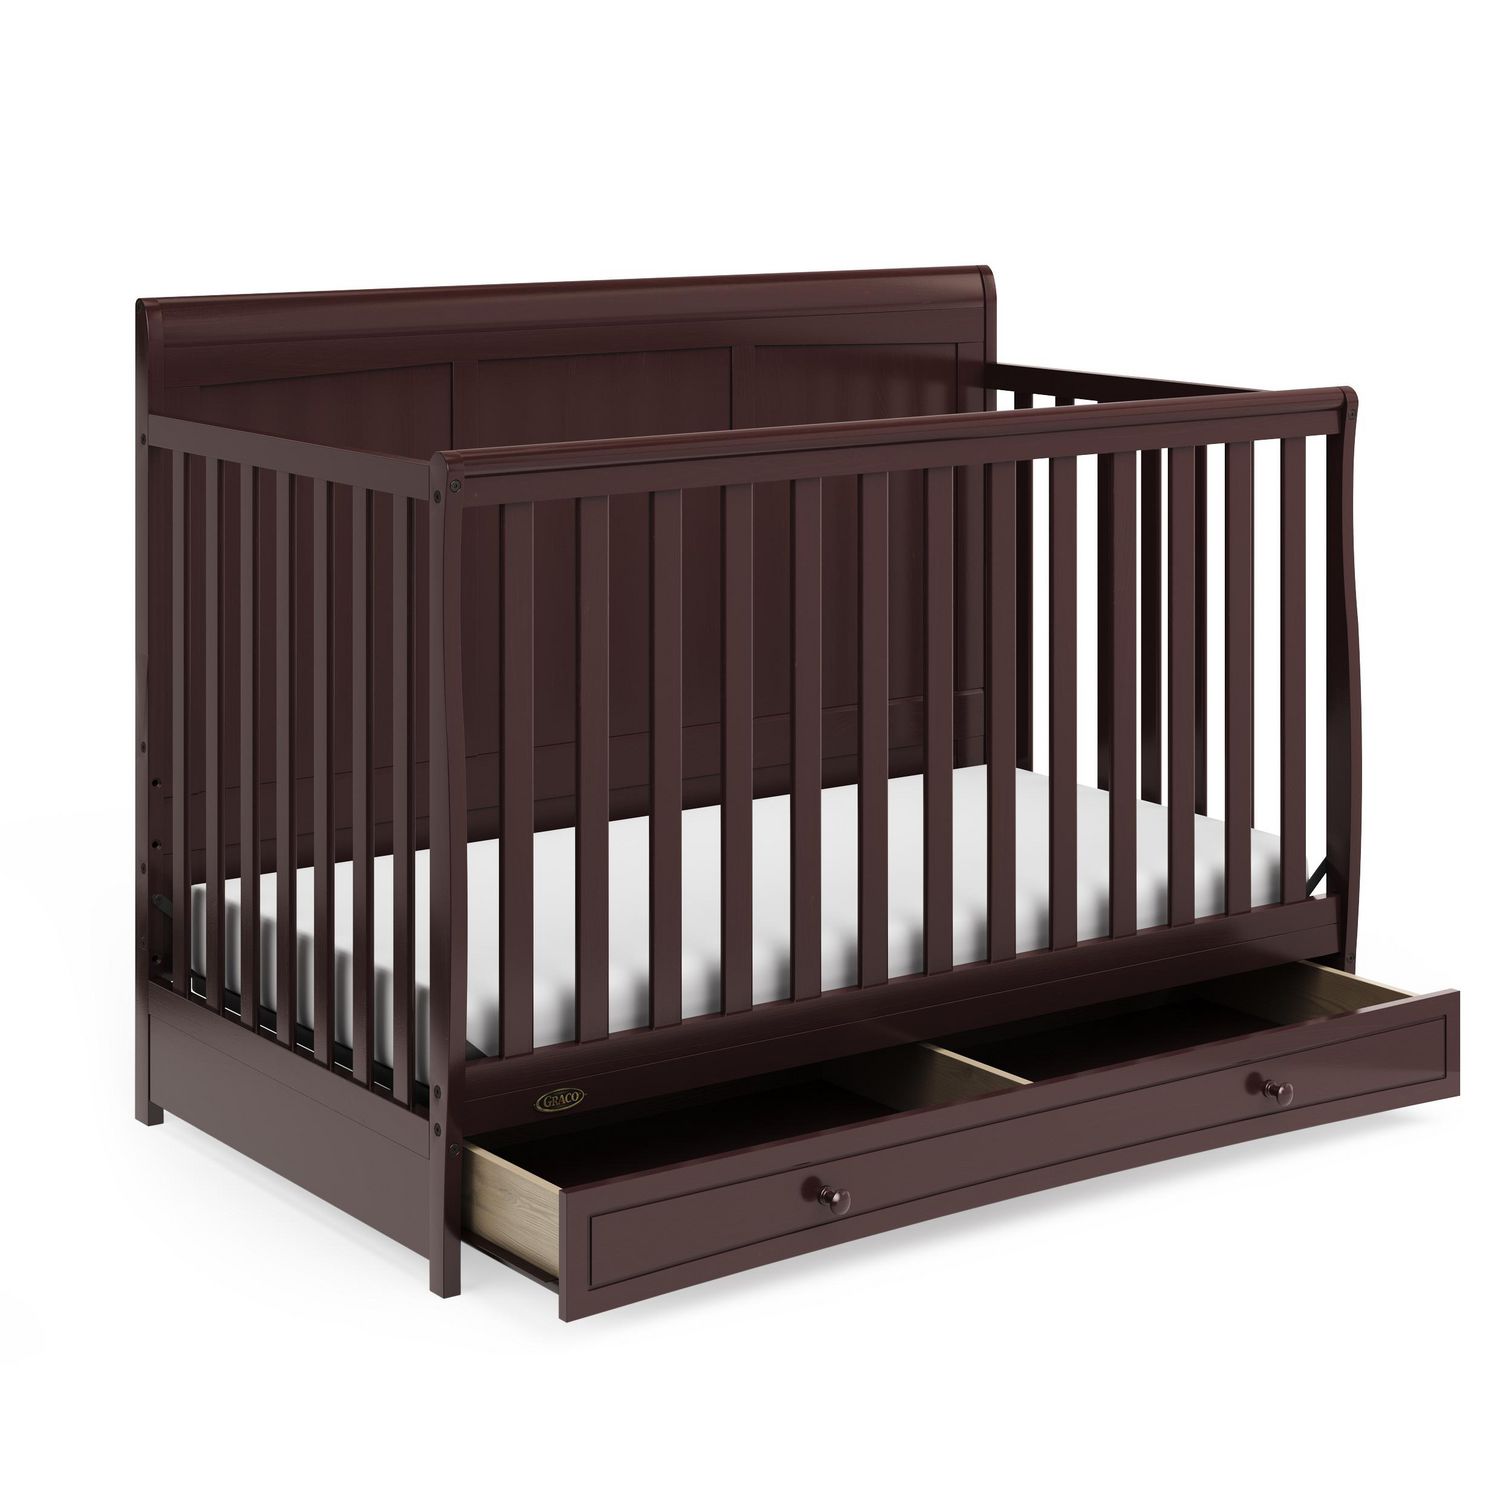 Espresso Graco Asheville 4in1 Convertible Crib with Drawer FullSize Storage Drawer Crib Easily Converts to Daybed Toddler Bed FullSize Bed 